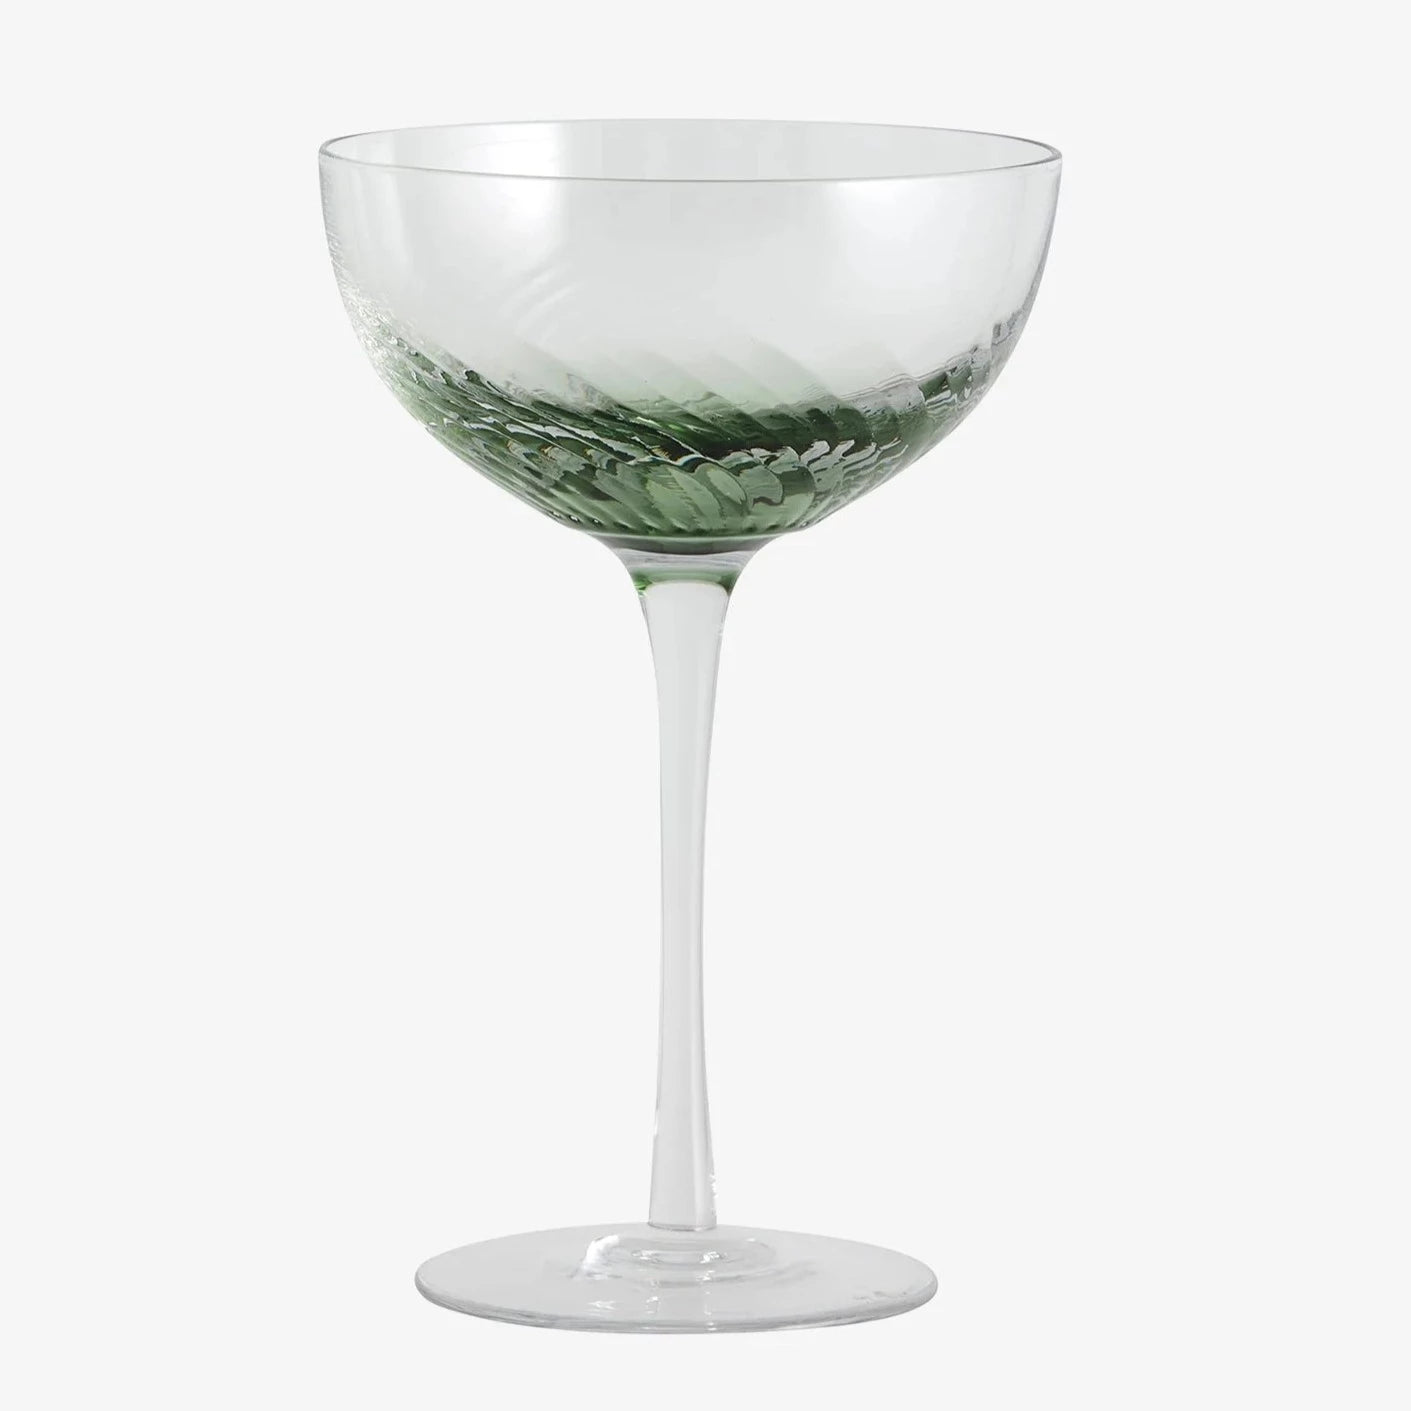 2 Cut Green Glow Cocktail Glasses